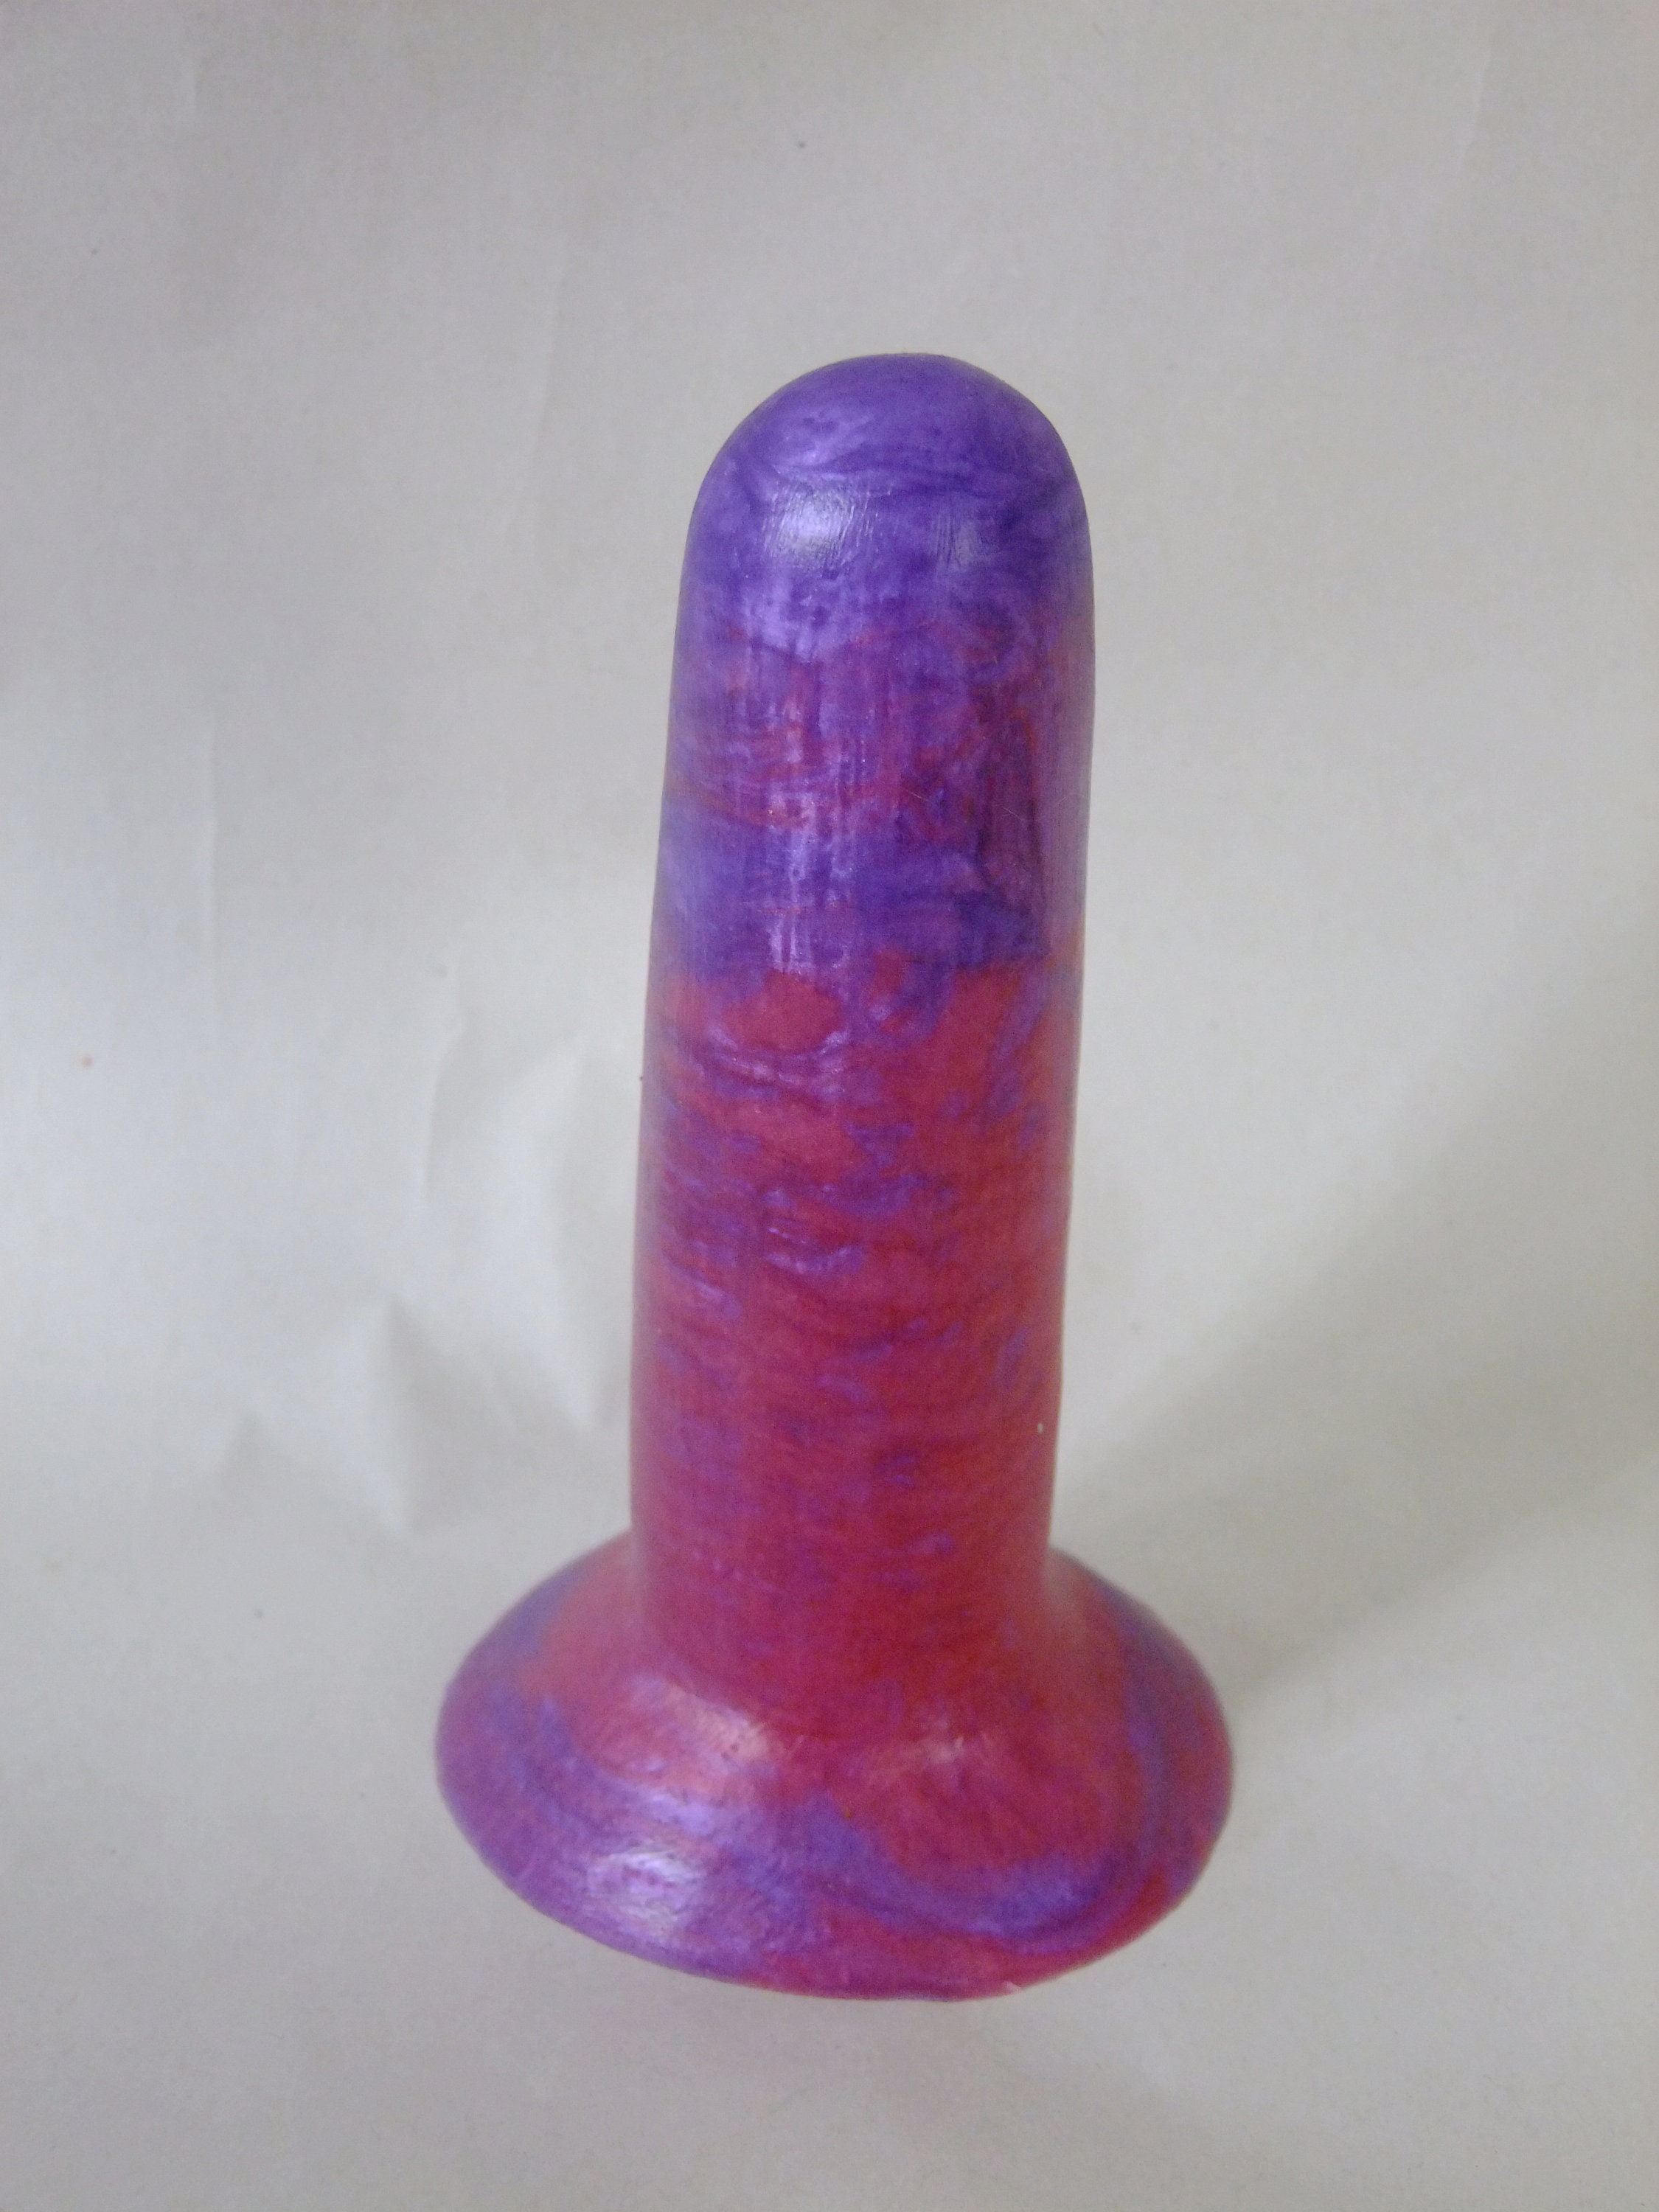 MATURE Platinum Silicone Dildo Adult Toy Squishy and Soft picture